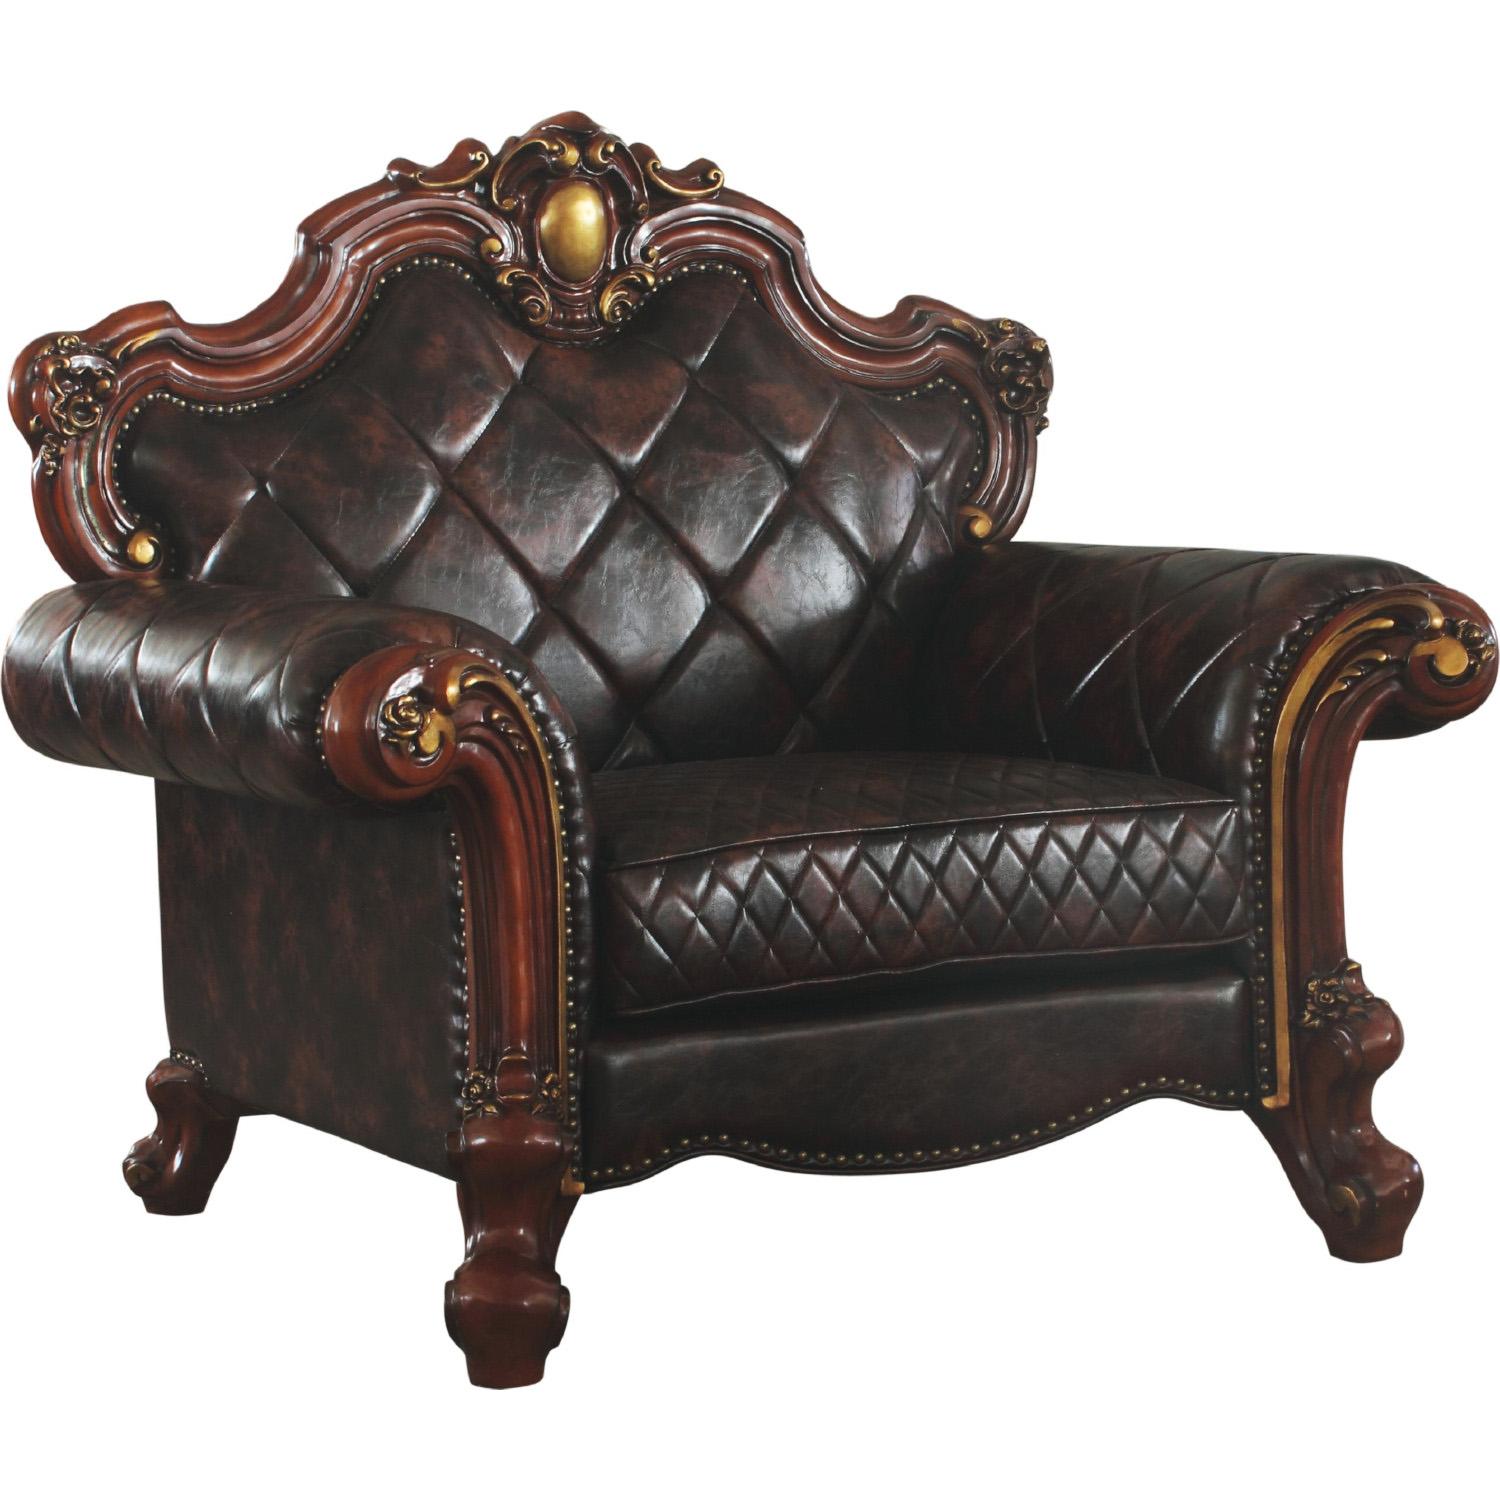 Classic, Traditional Arm Chair Picardy 58222 58222-Picardy in Oak, Cherry PU